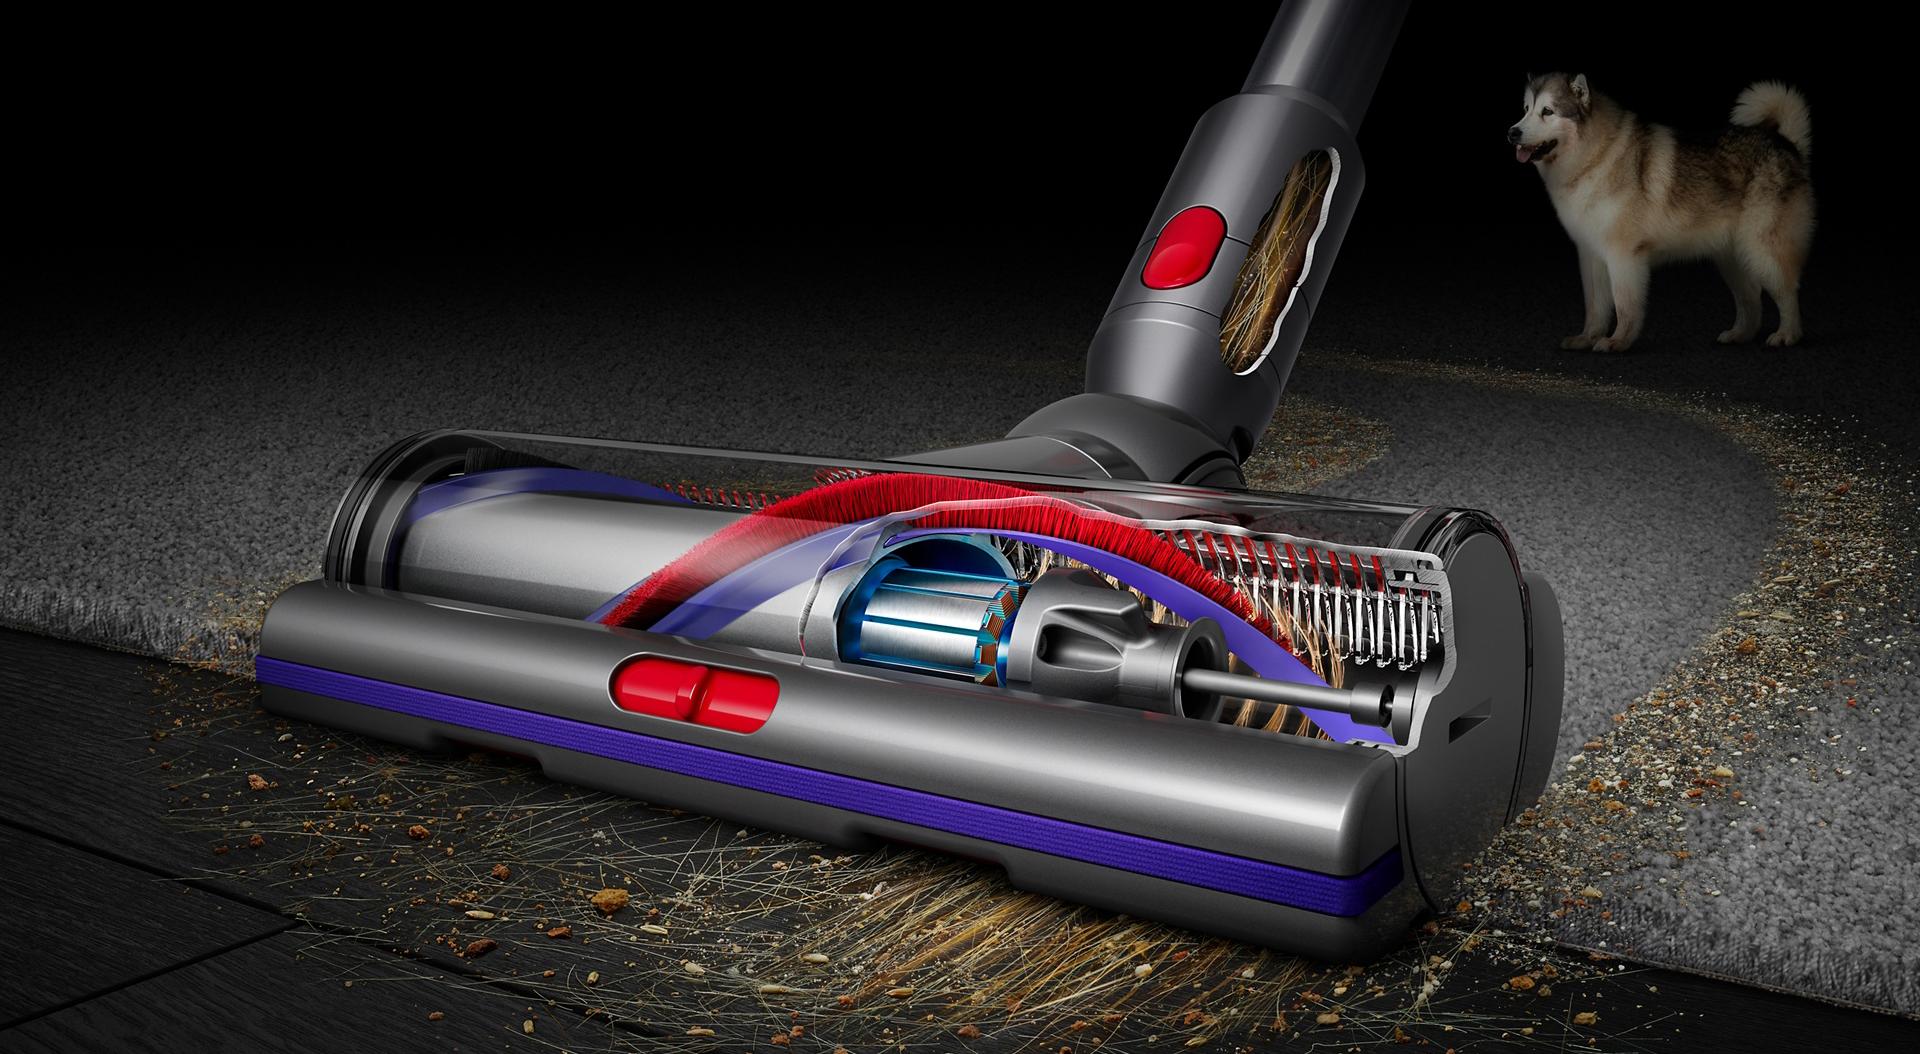 Dyson Motorbar cleaner head cleaning across a hard floor and a carpet